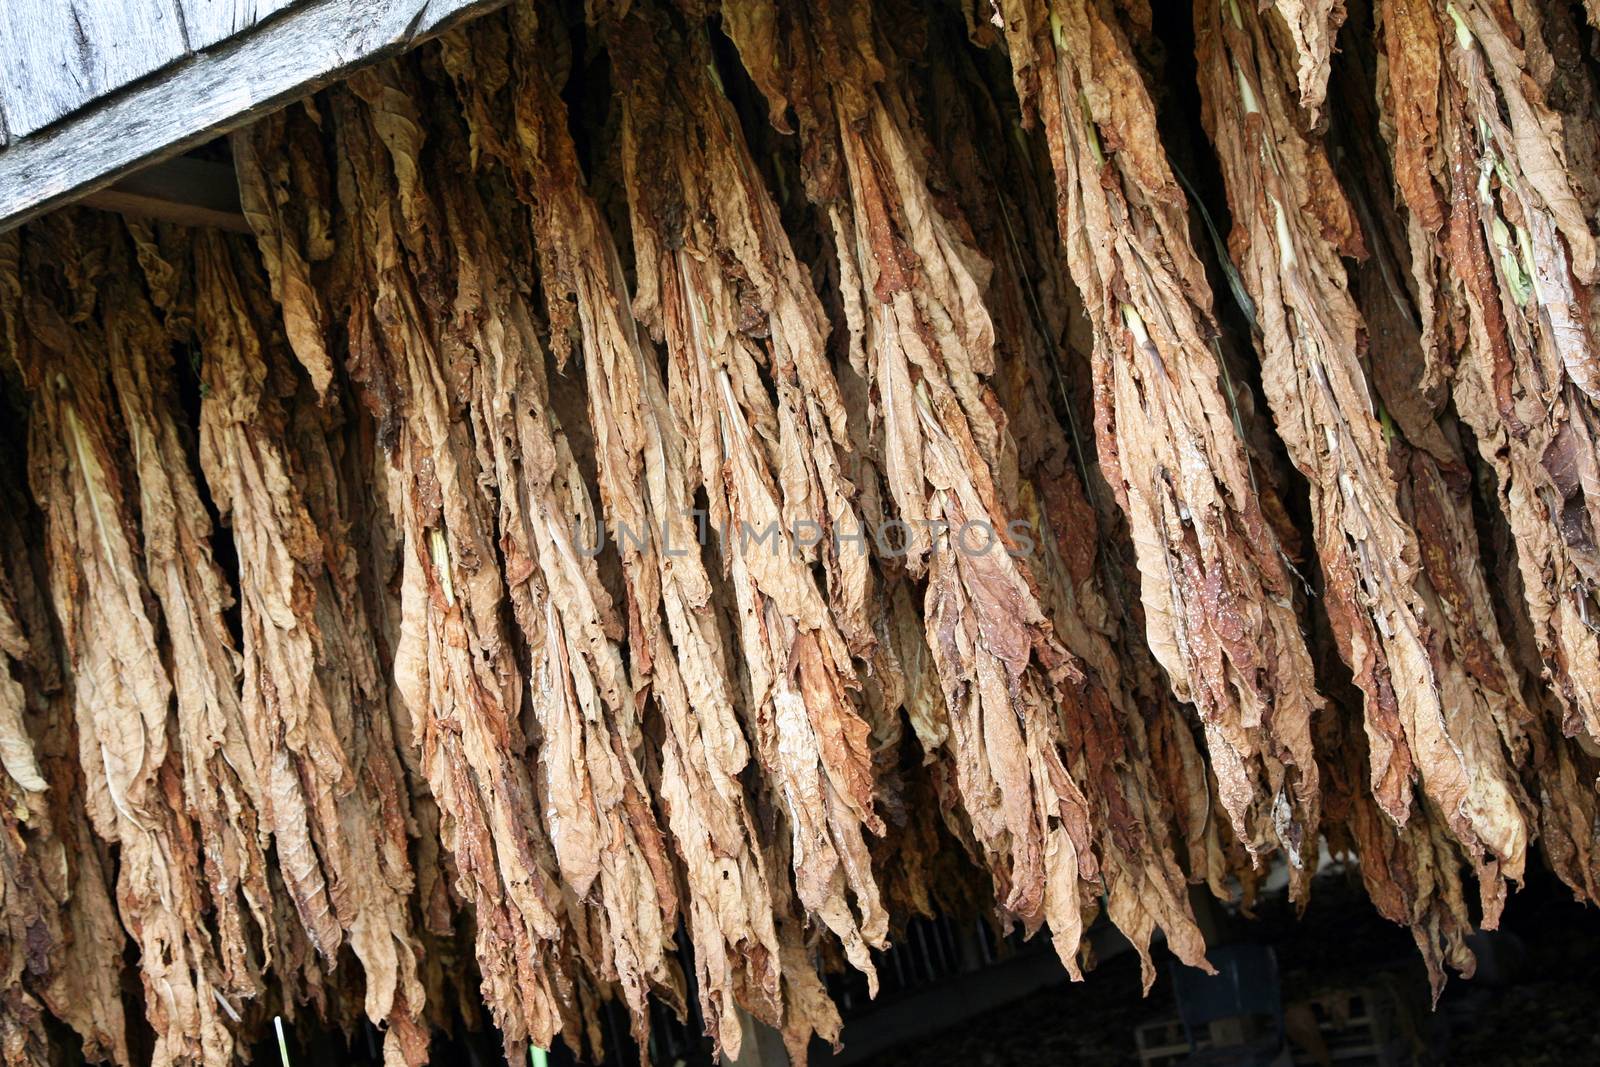 Tobacco hanging in the barn by jimmartin